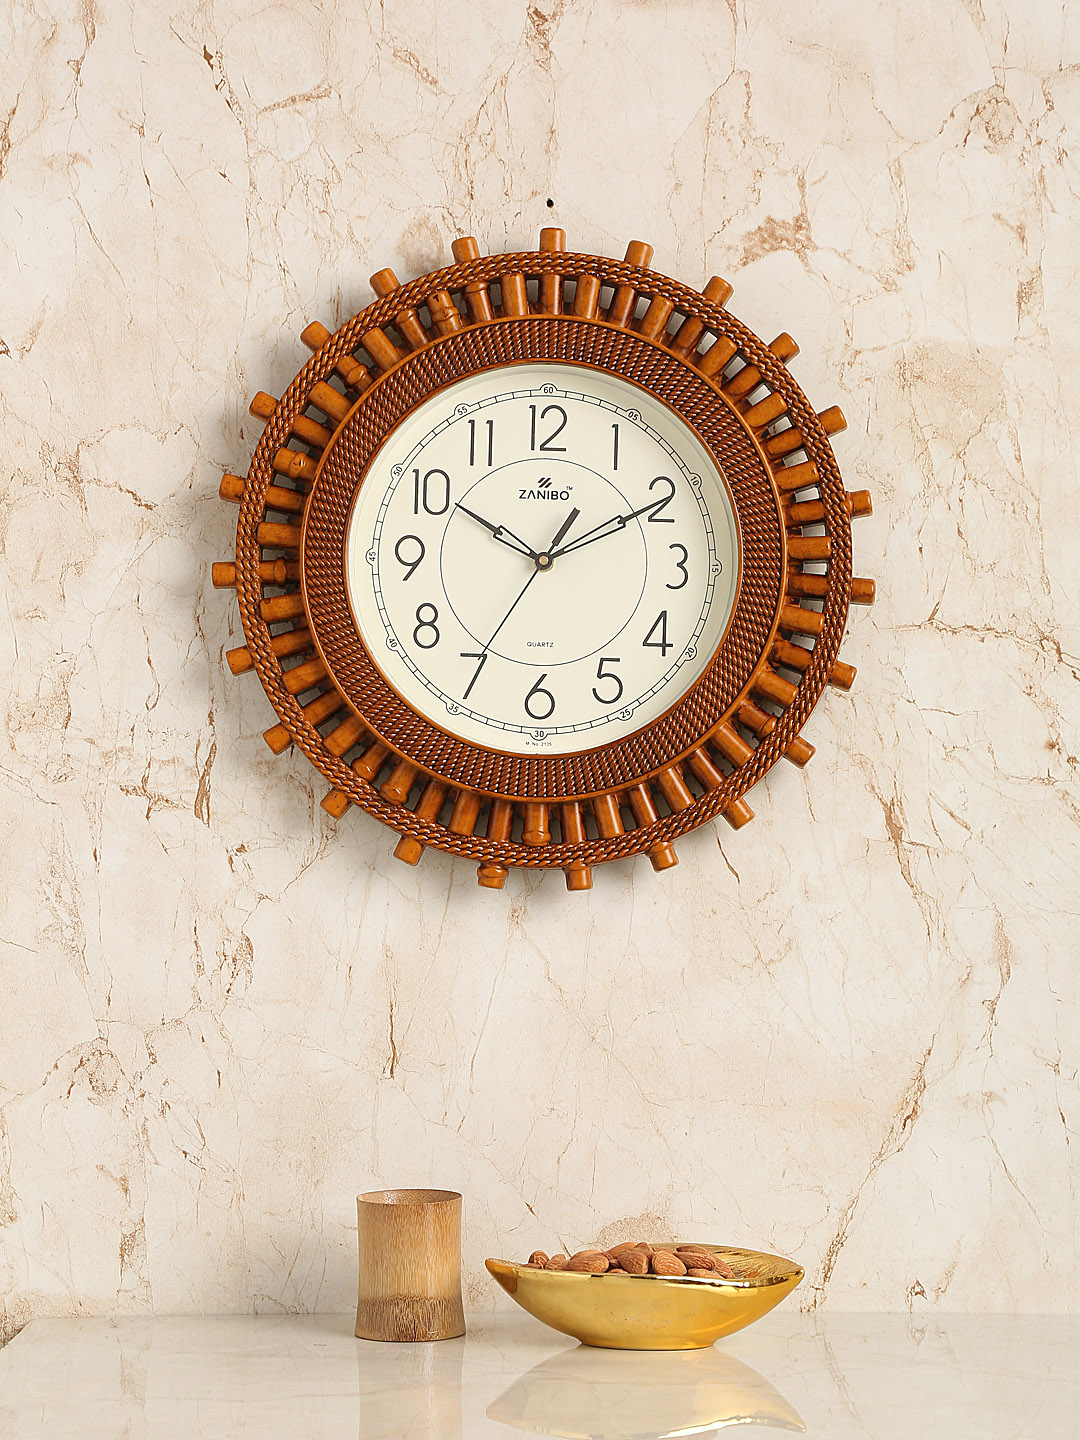 ZANIBO Yellow Quirky Solid Analogue Wall Clock Price in India